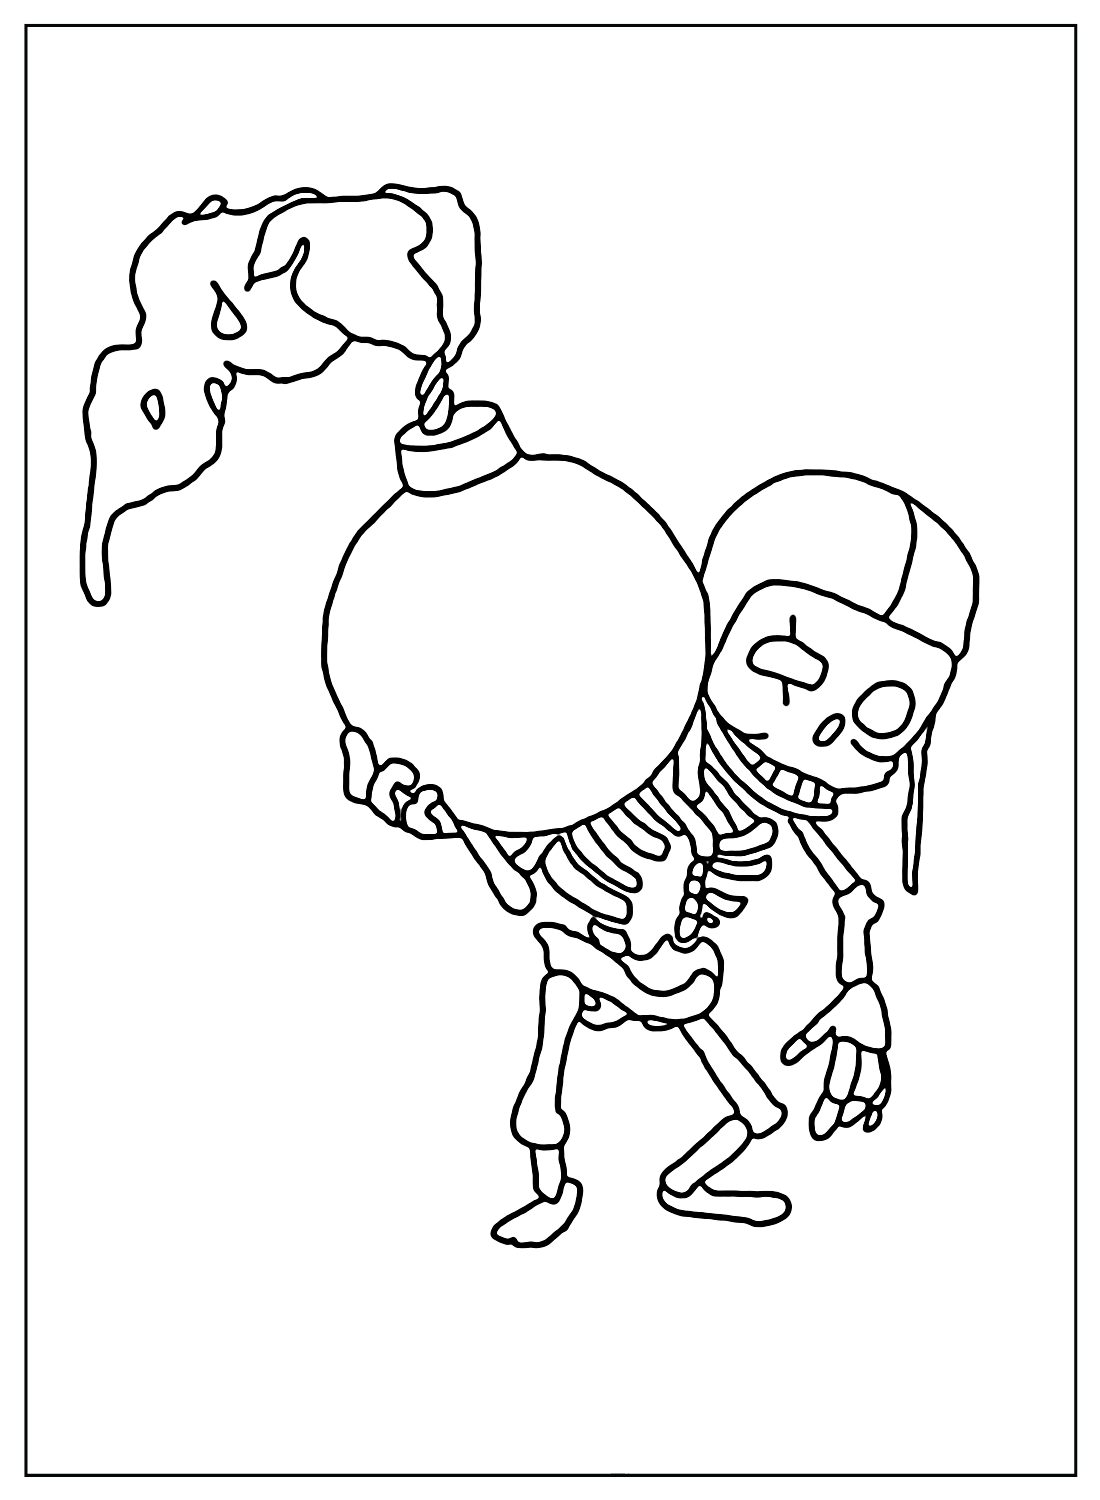 Clash of Clans Coloring Sheets from Clash of Clans